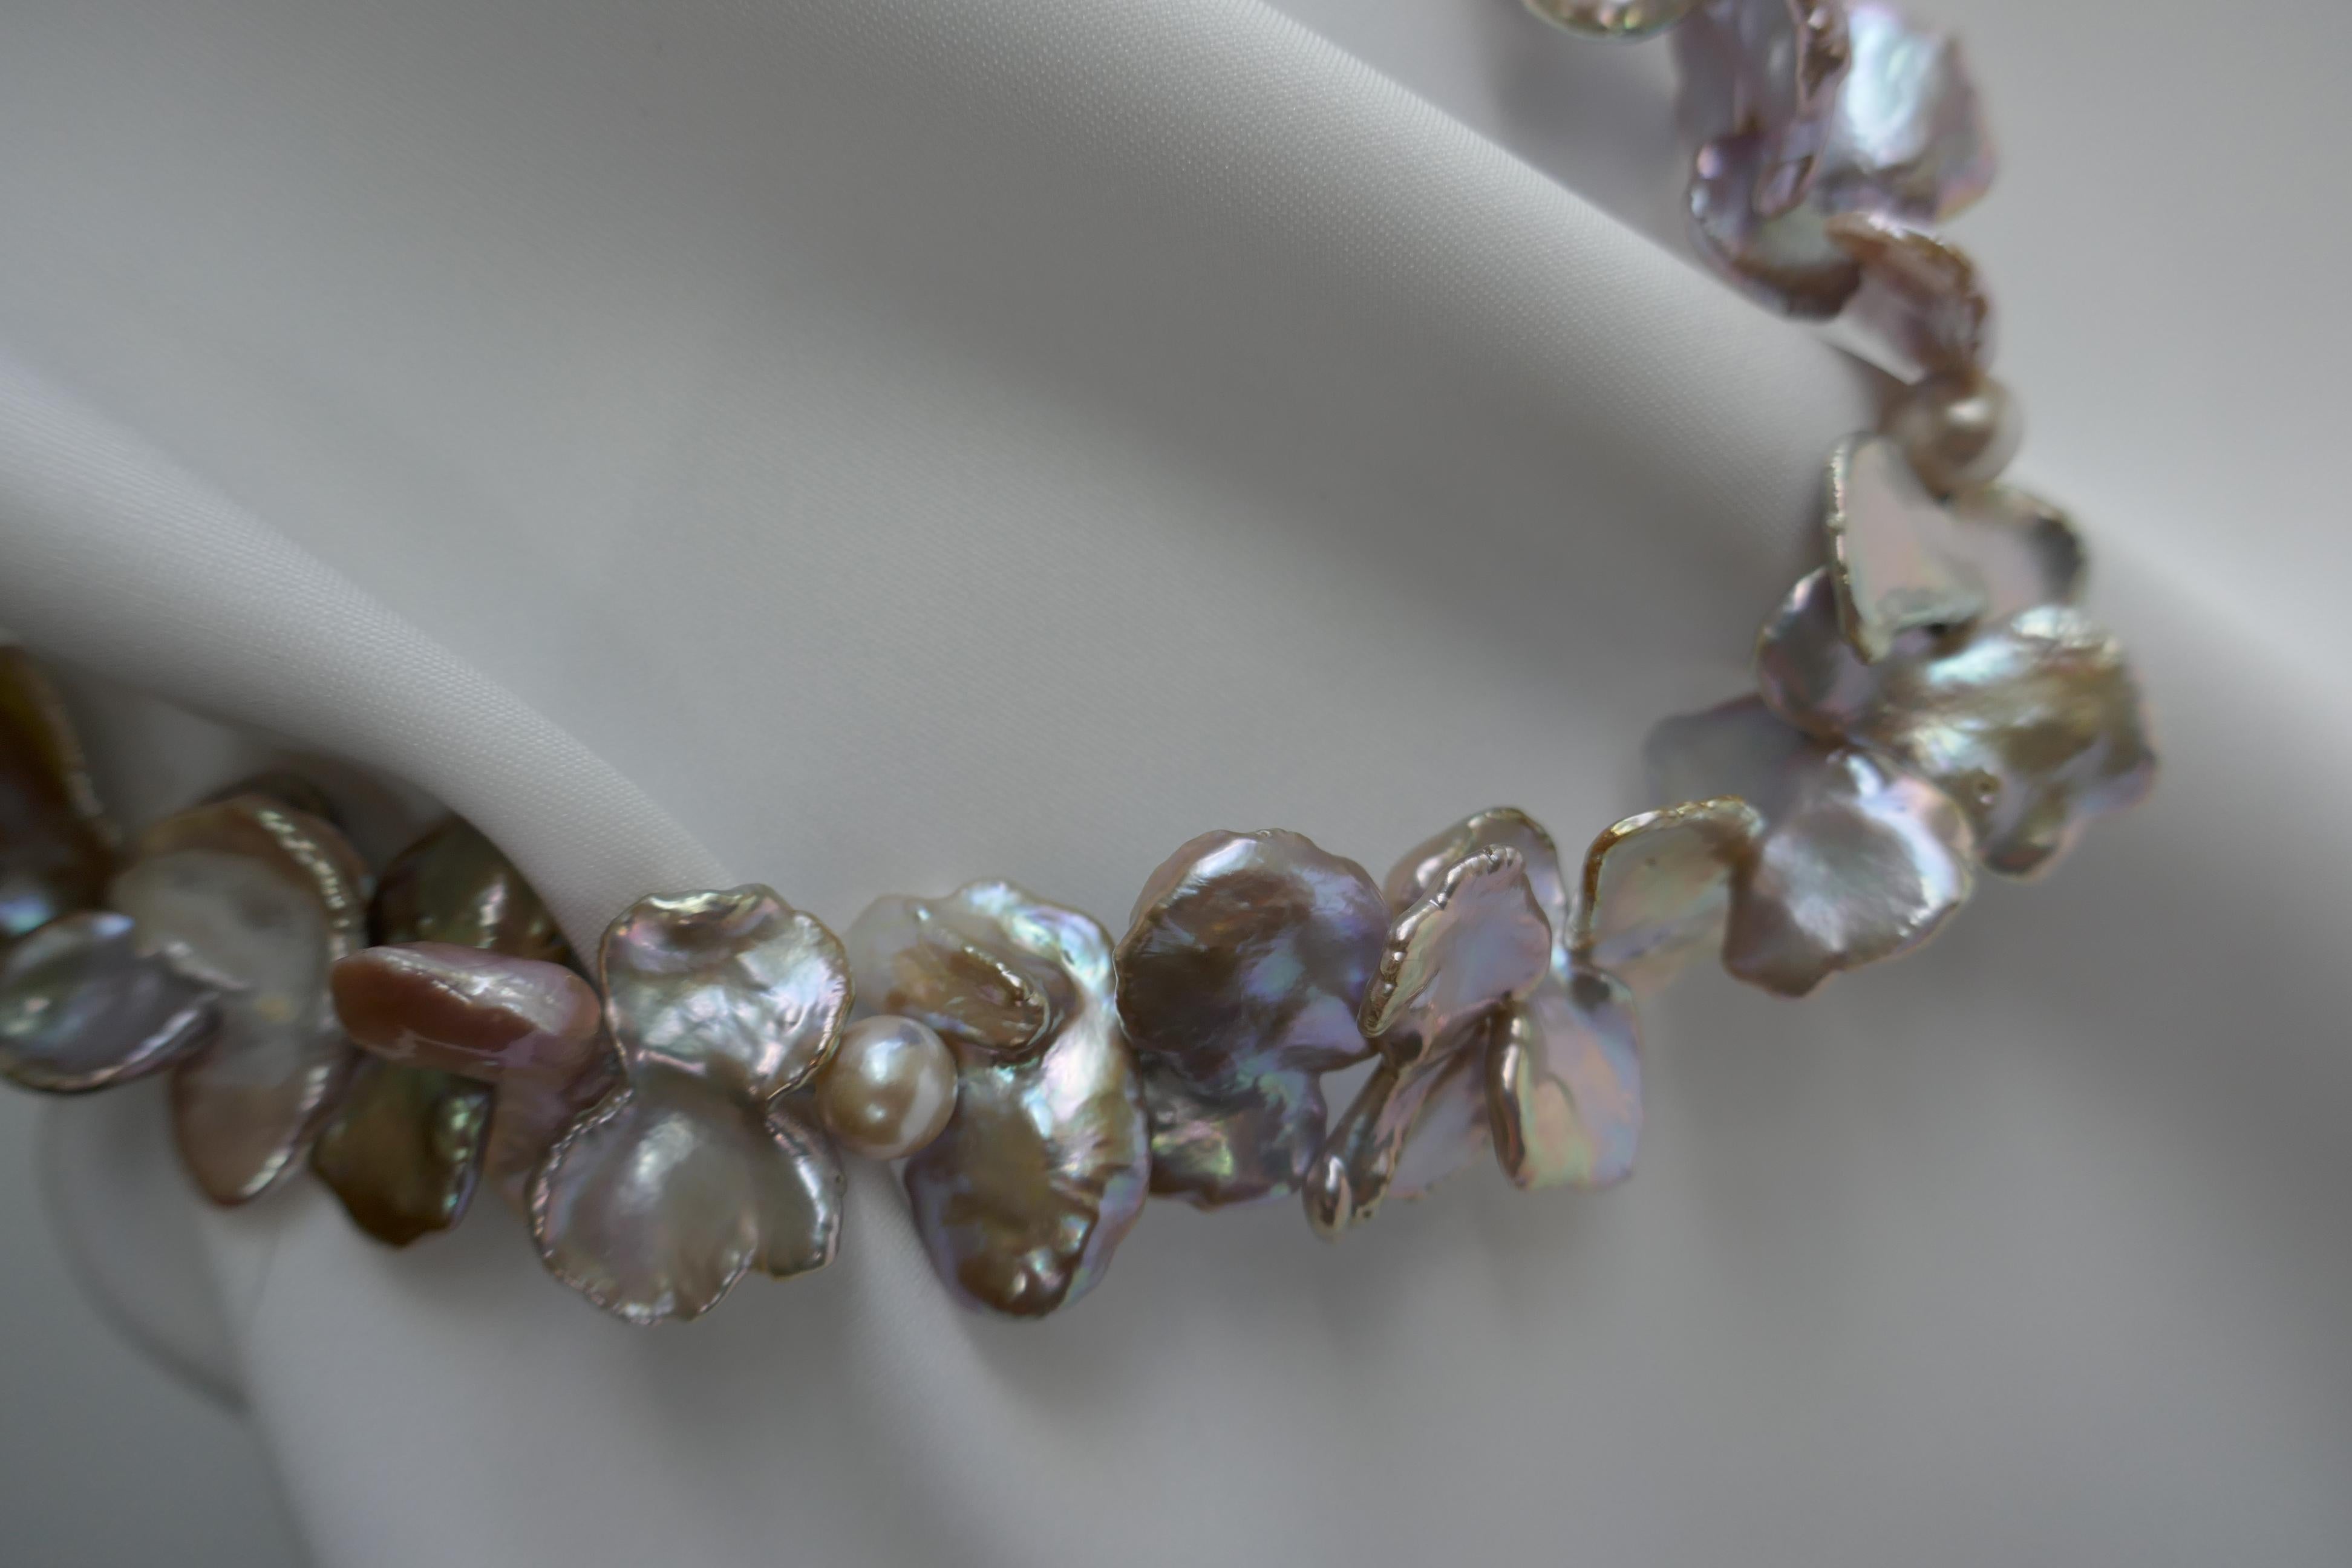 These keshi pearls on this necklace are beautiful and not easy to find. This is definitely a one of a kind statement necklace. The keshi pearls are in natural tones. The size is spectacular on these irregular shaped keshi pearls. The keshi pearls